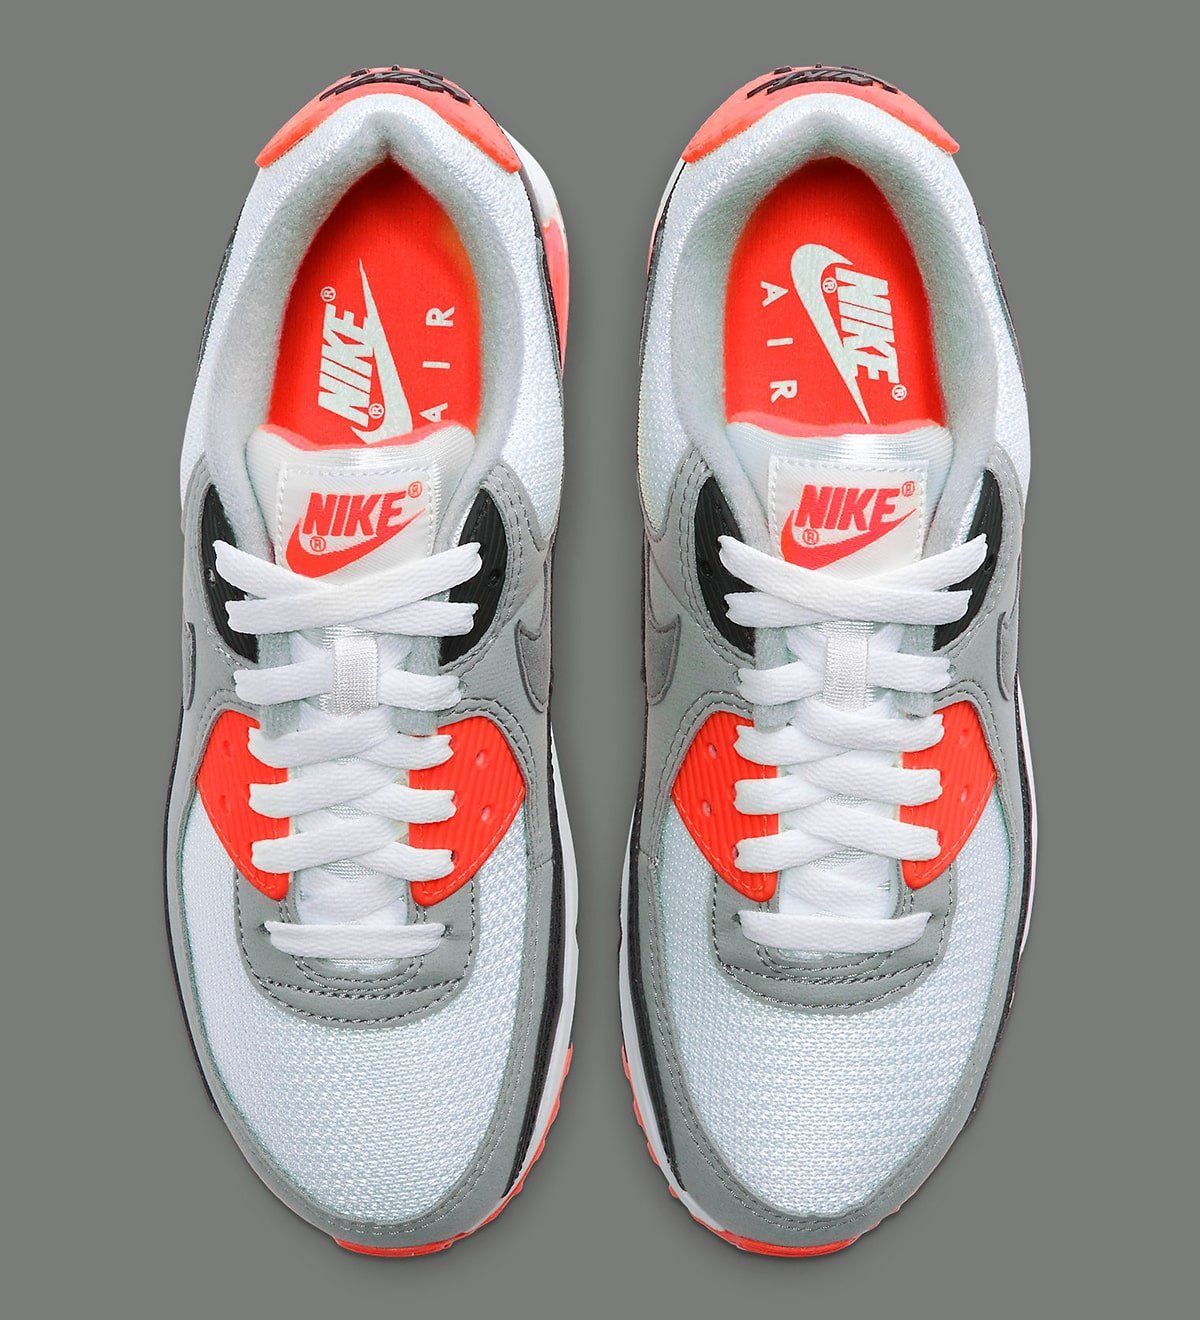 why Orbit unstable Where to Buy the Nike Air Max 90 "Infrared" OG | HOUSE OF HEAT